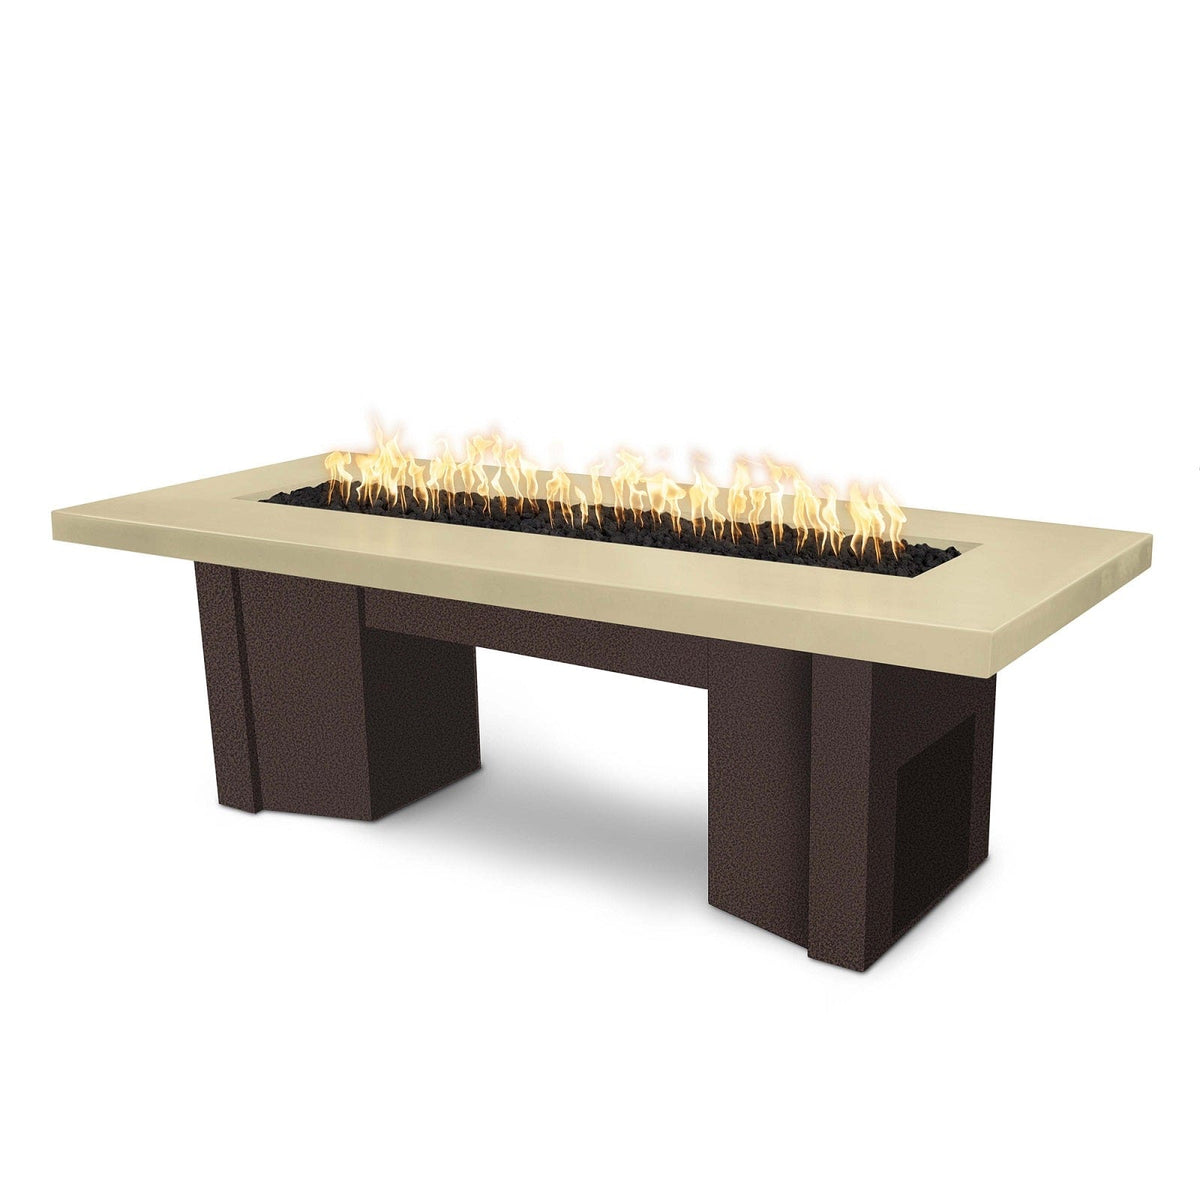 The Outdoor Plus Fire Features Vanilla (-VAN) / Copper Vein Powder Coated Steel (-CPV) The Outdoor Plus 60&quot; Alameda Fire Table Smooth Concrete in Natural Gas - Flame Sense System with Push Button Spark Igniter / OPT-ALMGFRC60FSEN-NG